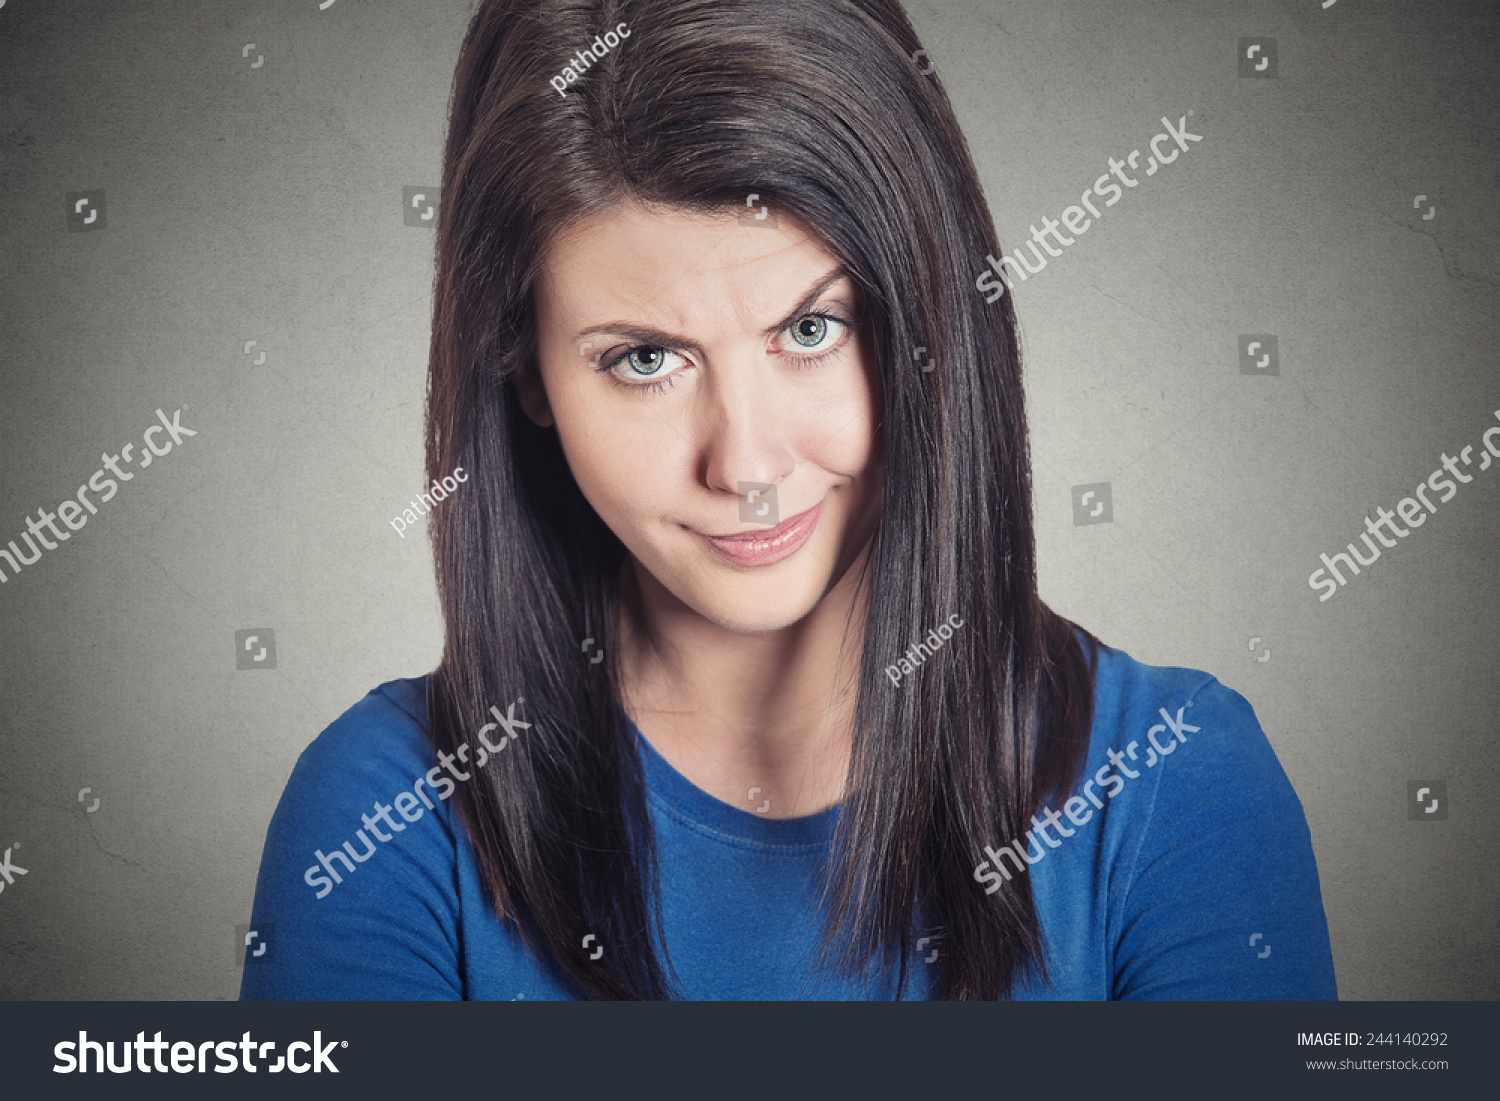 Closeup Portrait Headshot Skeptical Young Woman Looking Suspicious With Some Disgust On Her Face 4839